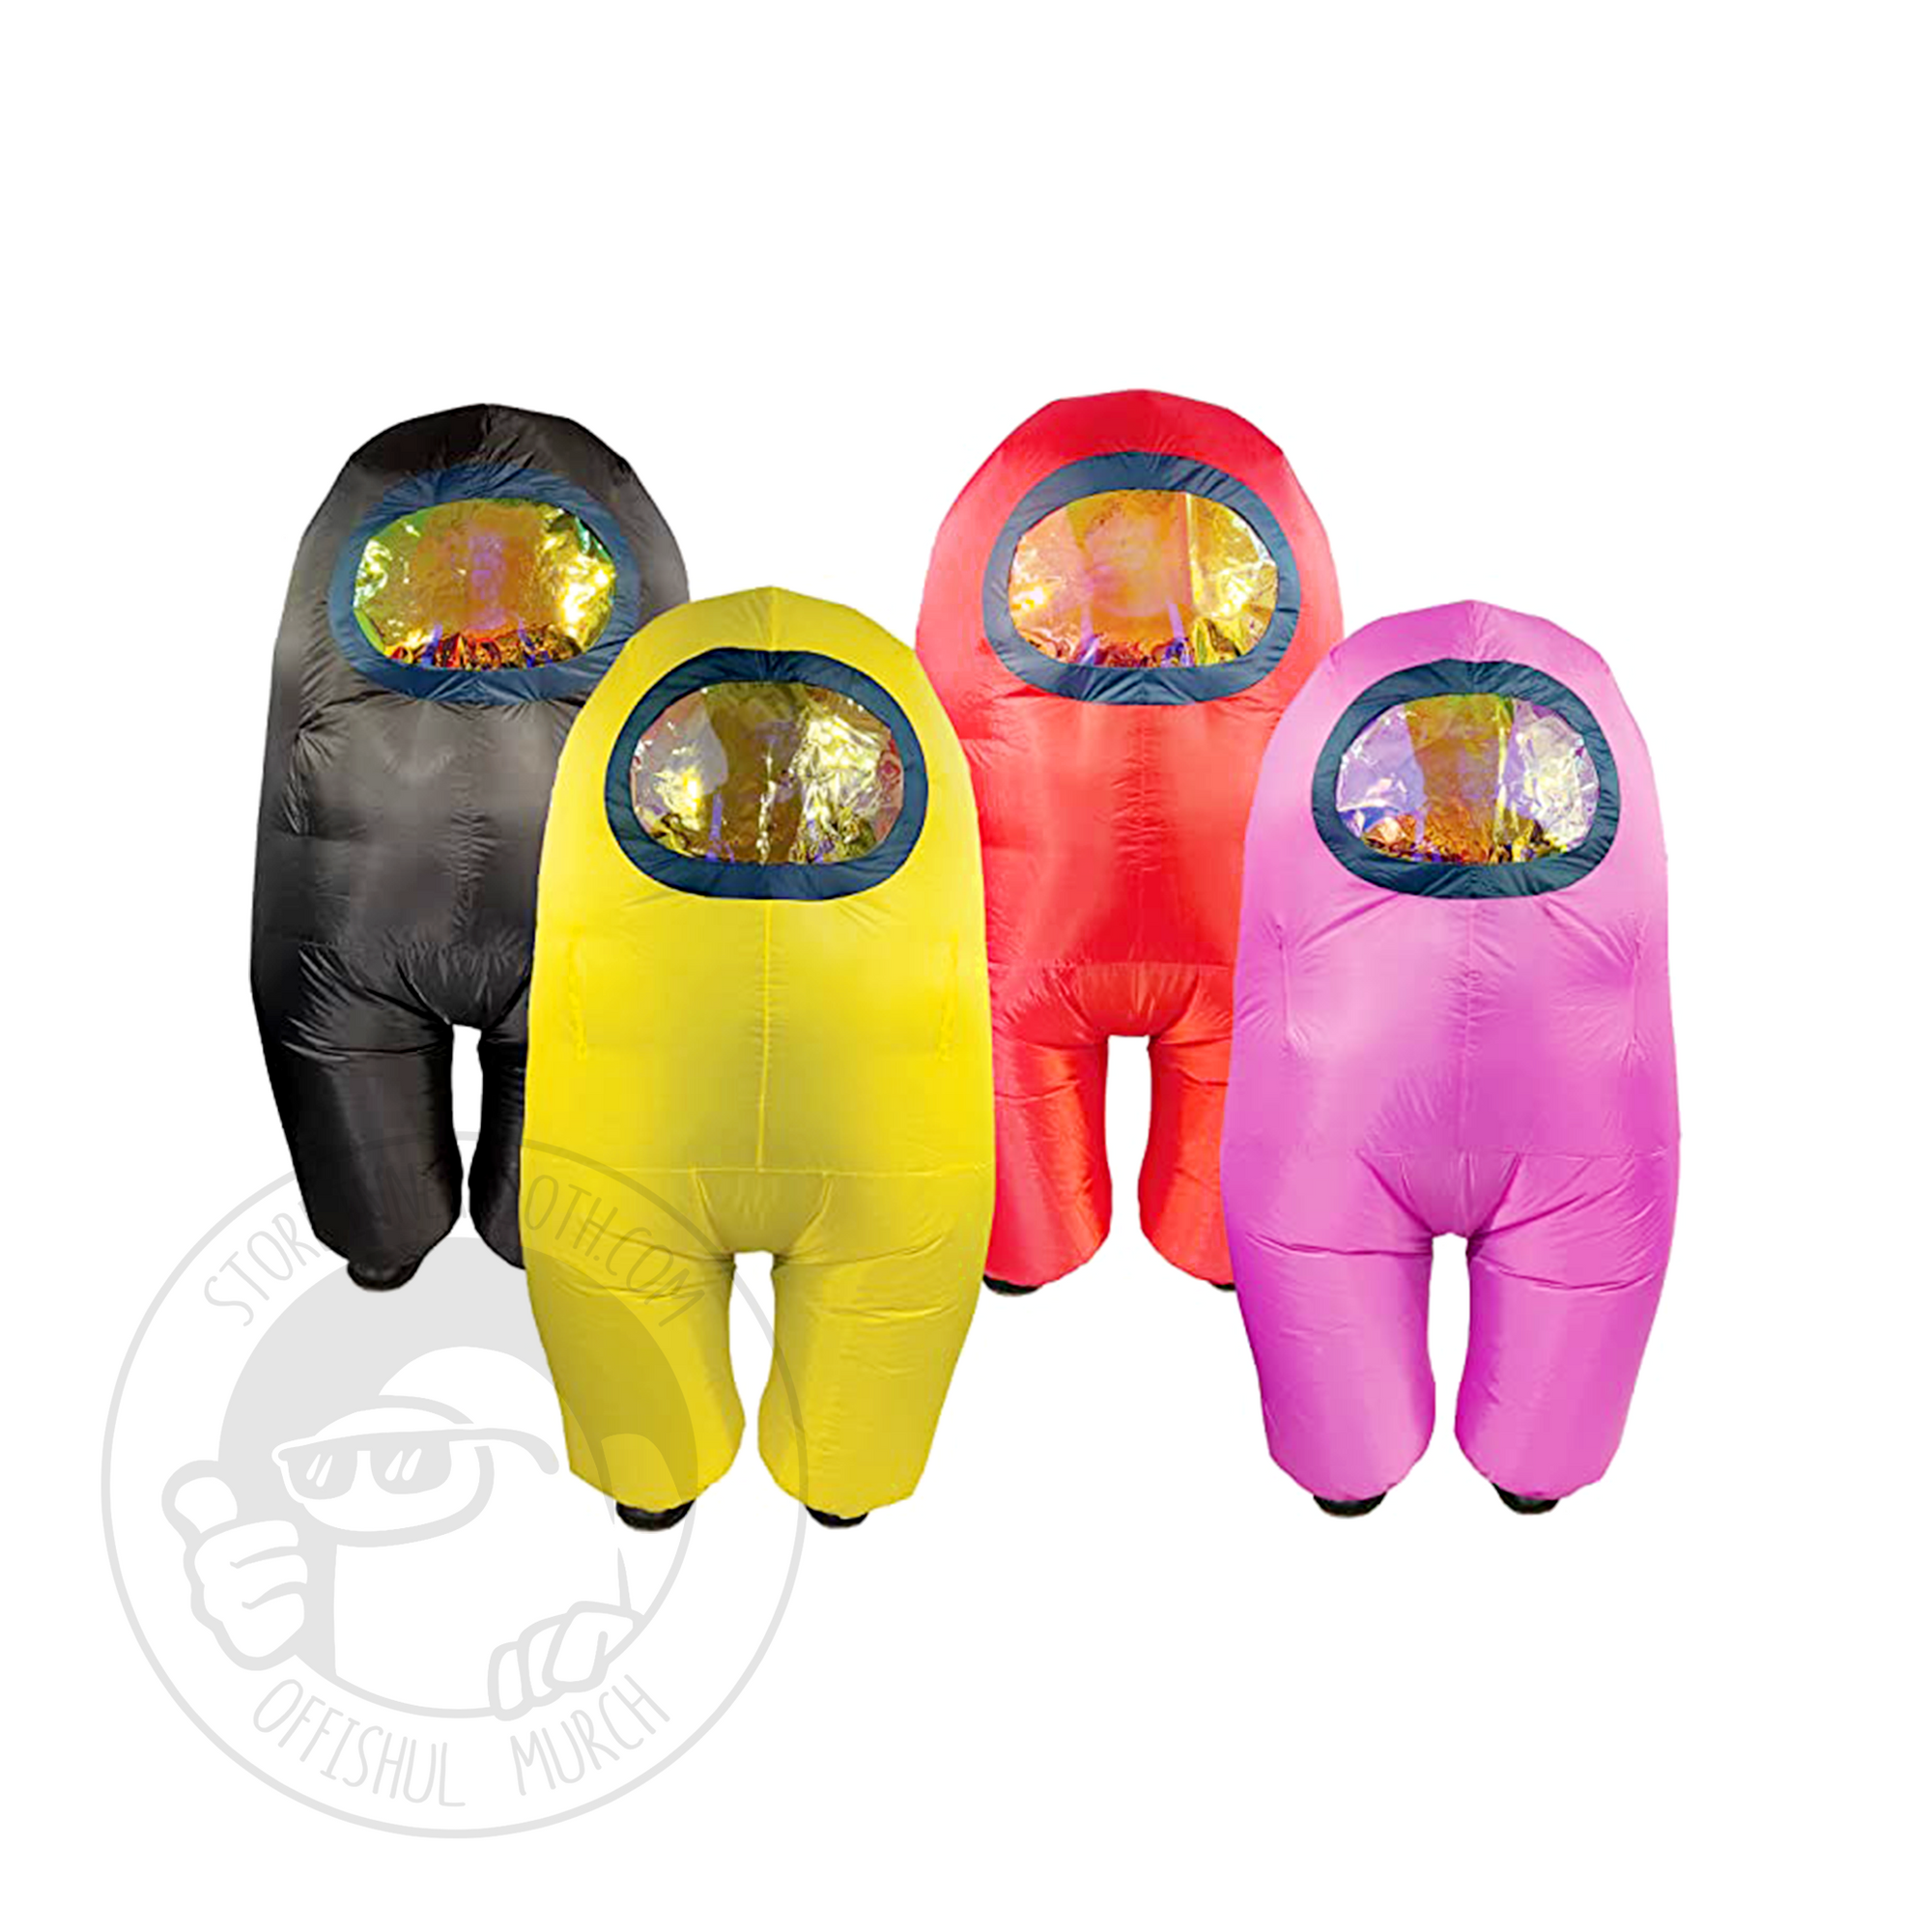 Front View group shot of the black, yellow, red, and pink adult-sized inflatable Crewmate costumes. The Crewmate visors are made of a tinted material to obscure the wearer's face. 